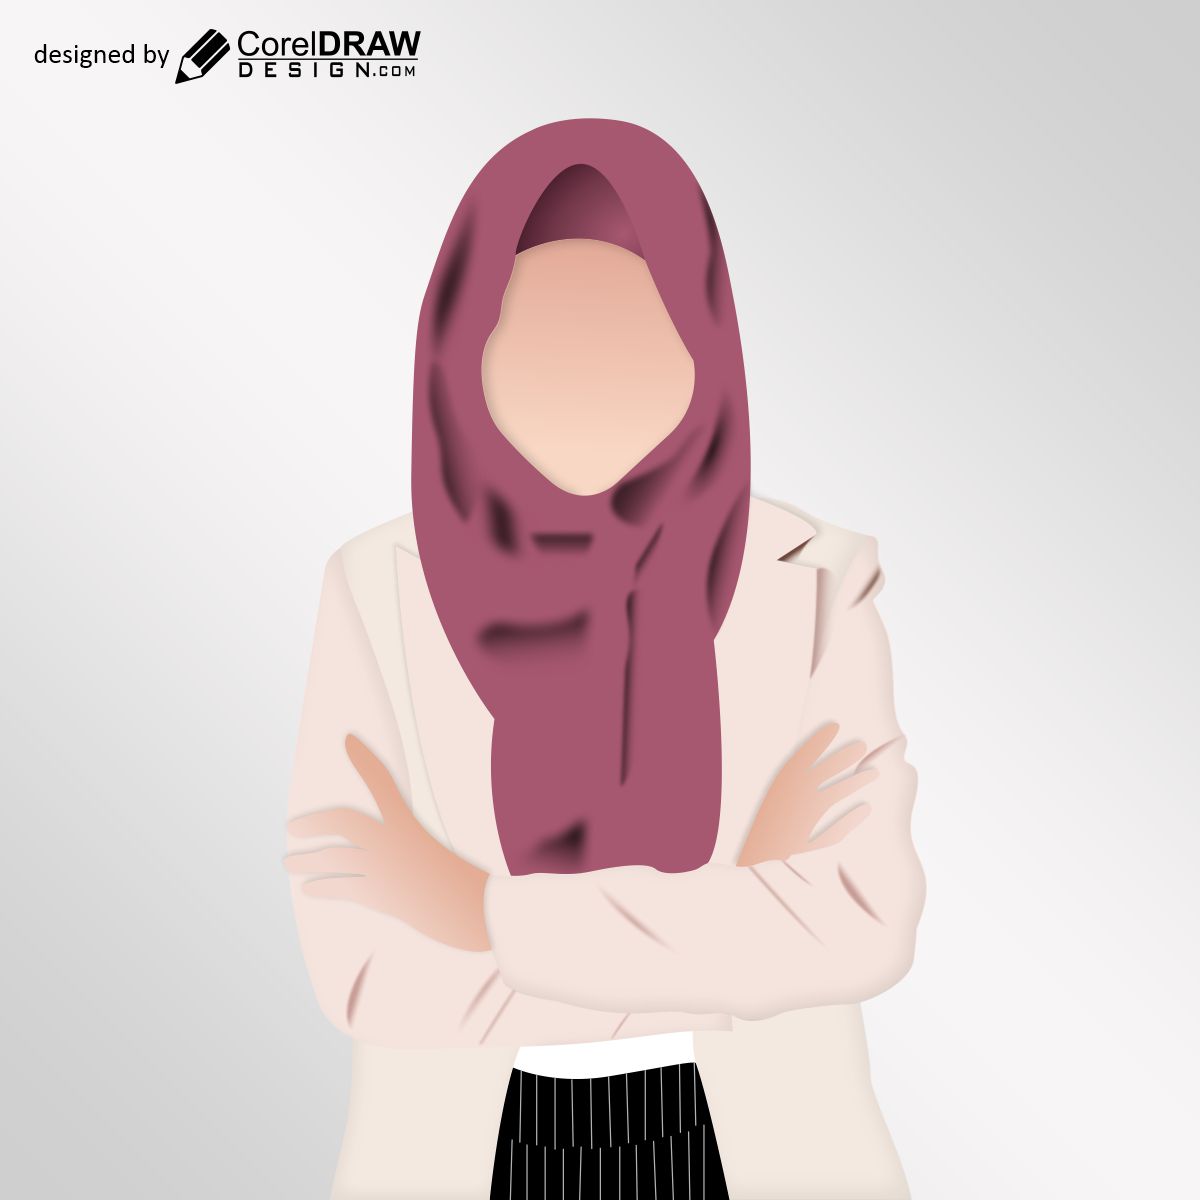 Hijab girl poster vector design for free